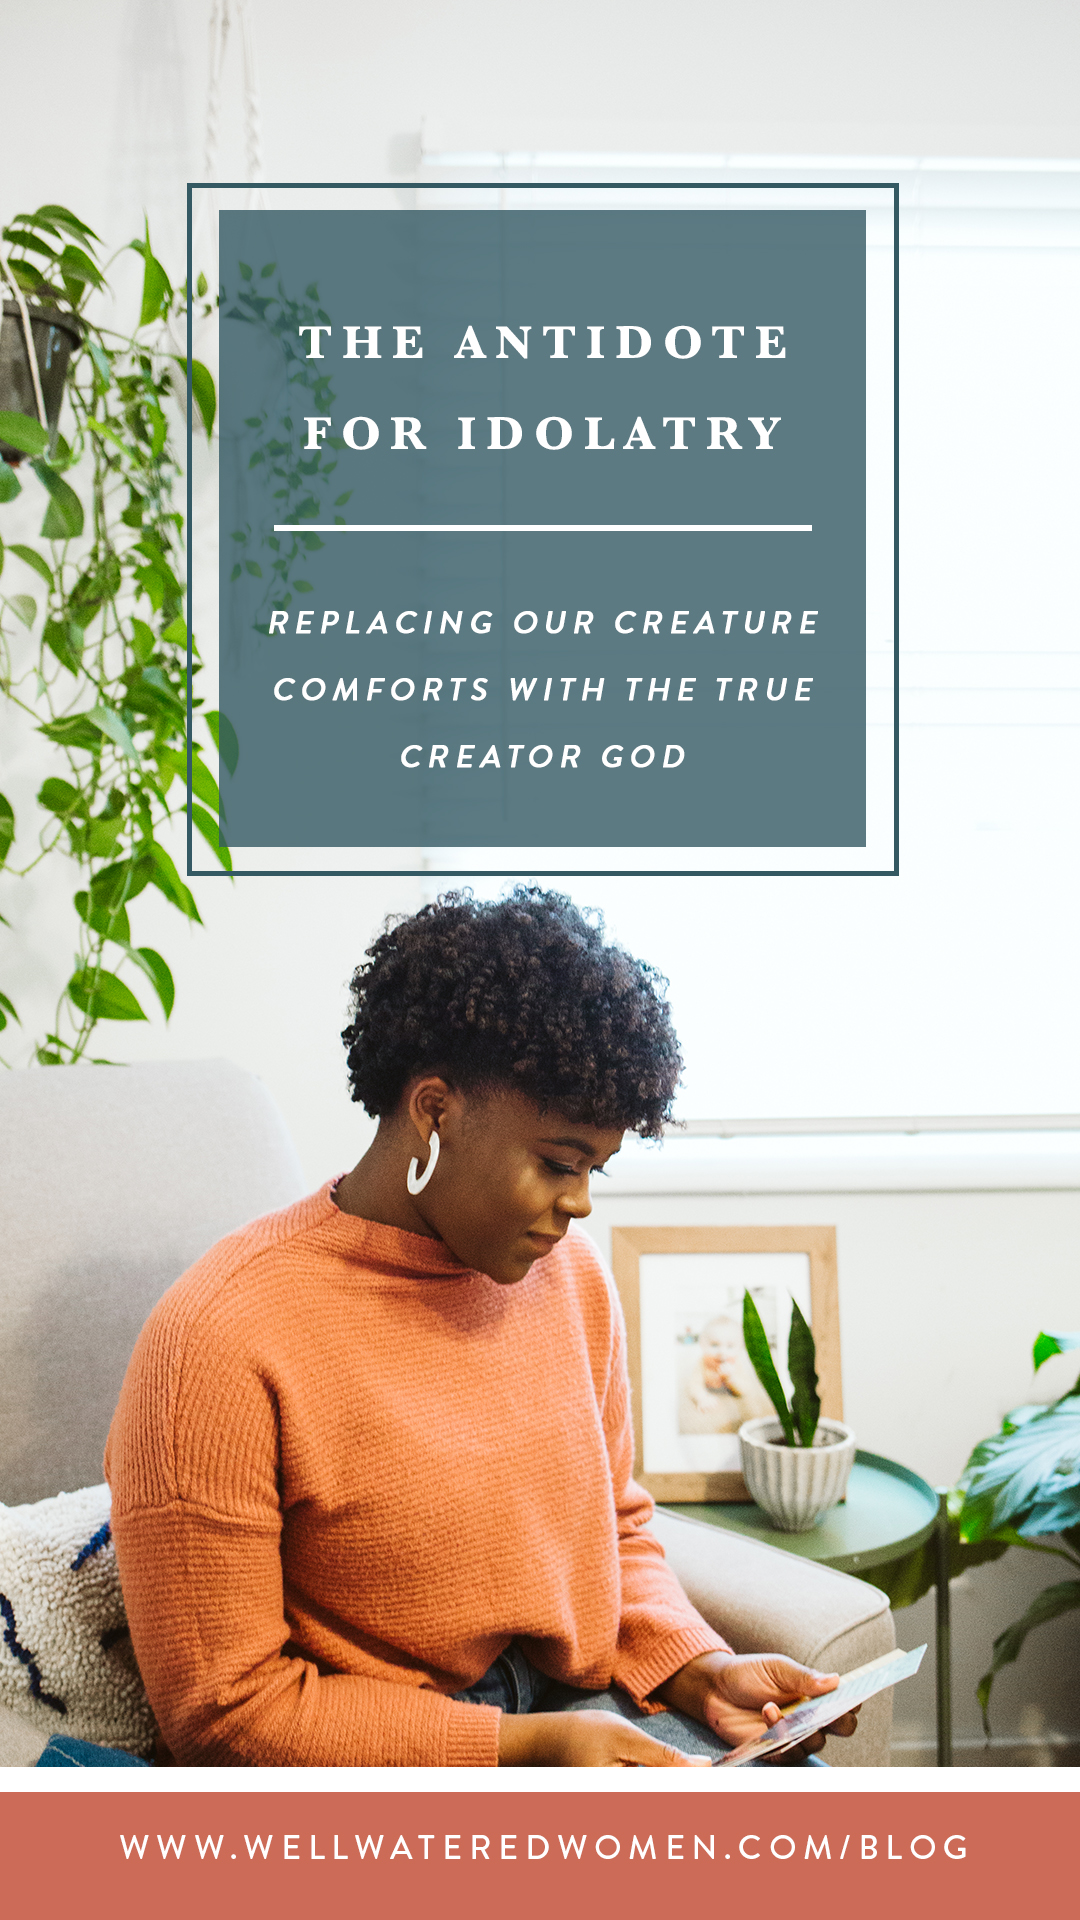 The Antidote to Idolatry: What is an idol? “An idol is anything that is central in my life, anything that seems to be essential. Anything by which I live or depend.” D. M. Lloyd-Jones | Well-Watered Women